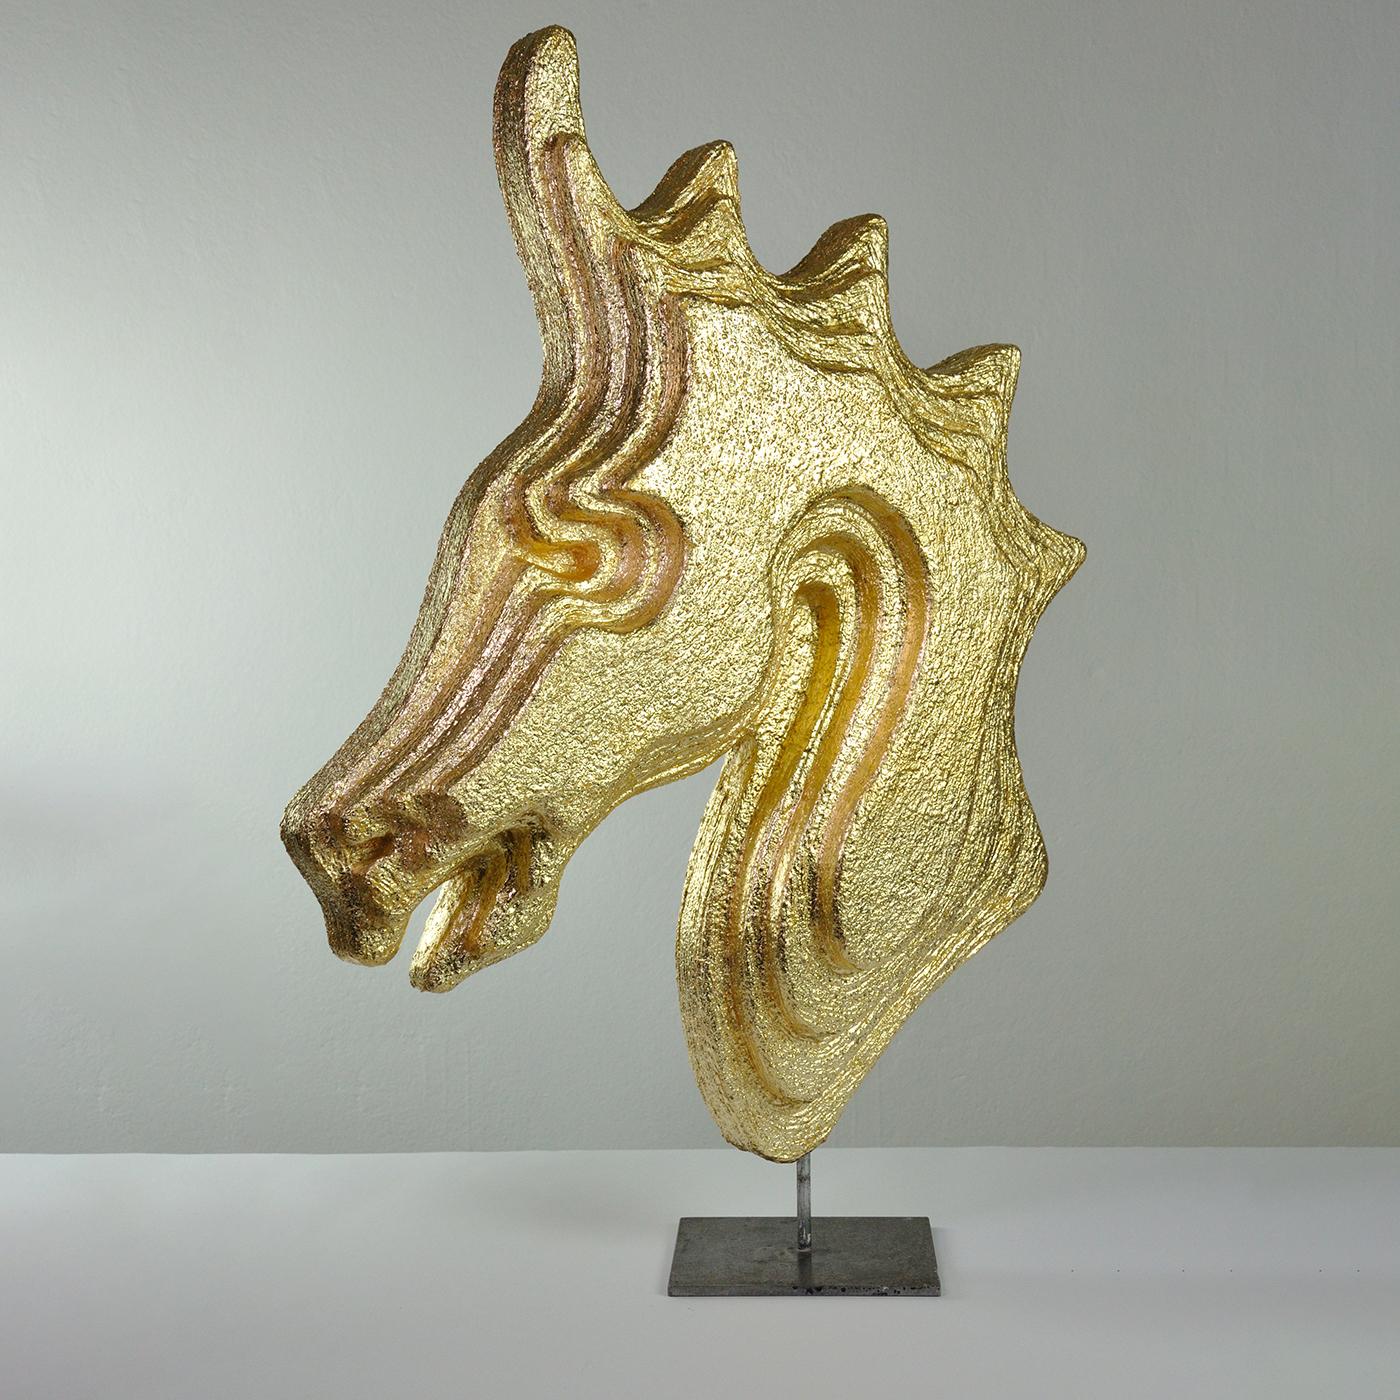 Opulence and craftsmanship splendidly intertwine in this bright sculpture of a stylized horse's head. Crafted of extruded polyurethane and finished with applications of plaster on relief, it boasts a dynamic layered design finally emphasized by